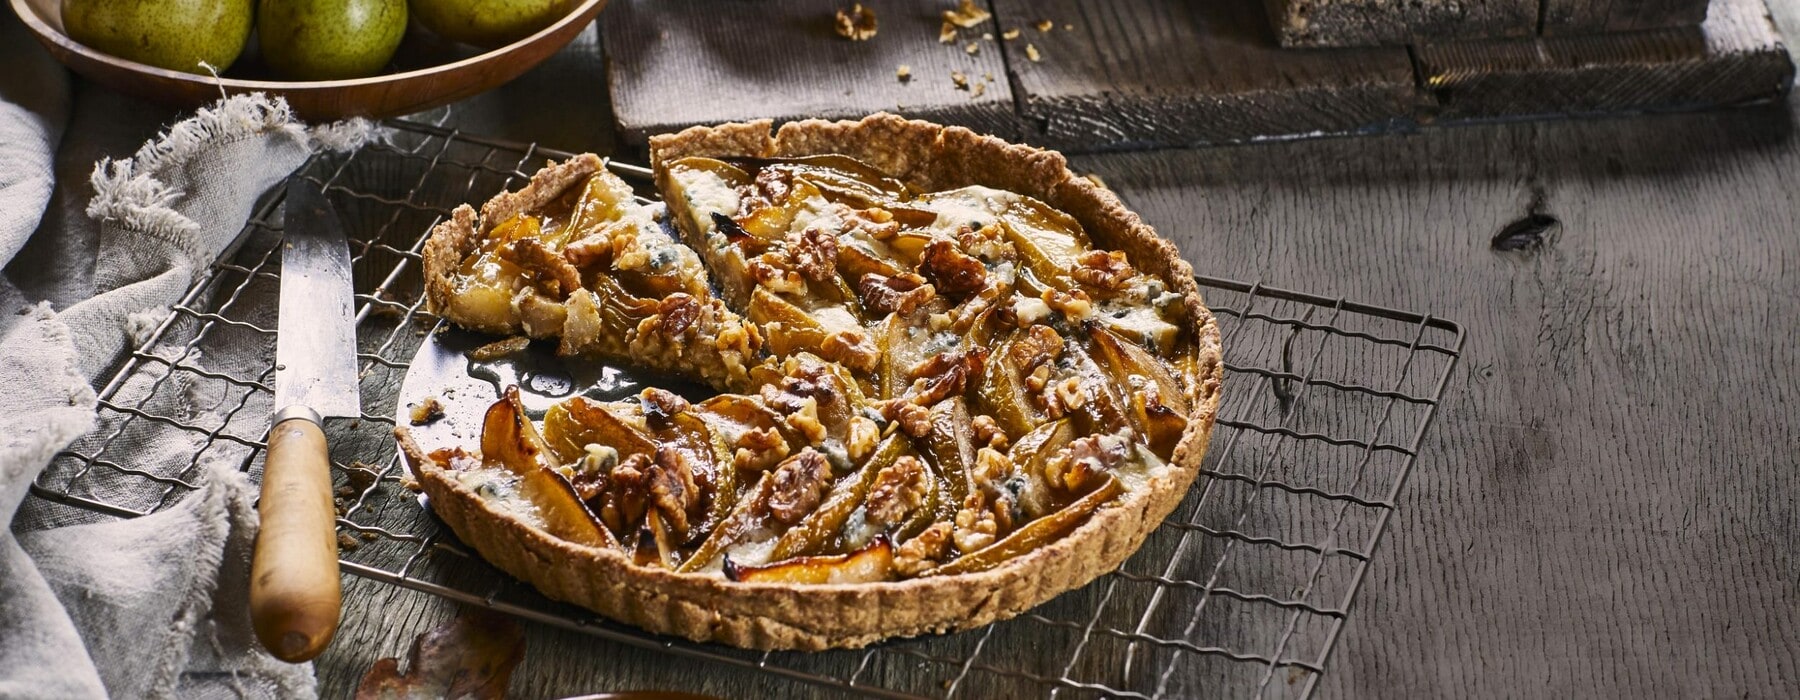 Pear, blue cheese and walnut tart being sliced by pair of hands while on a metallic oven rack